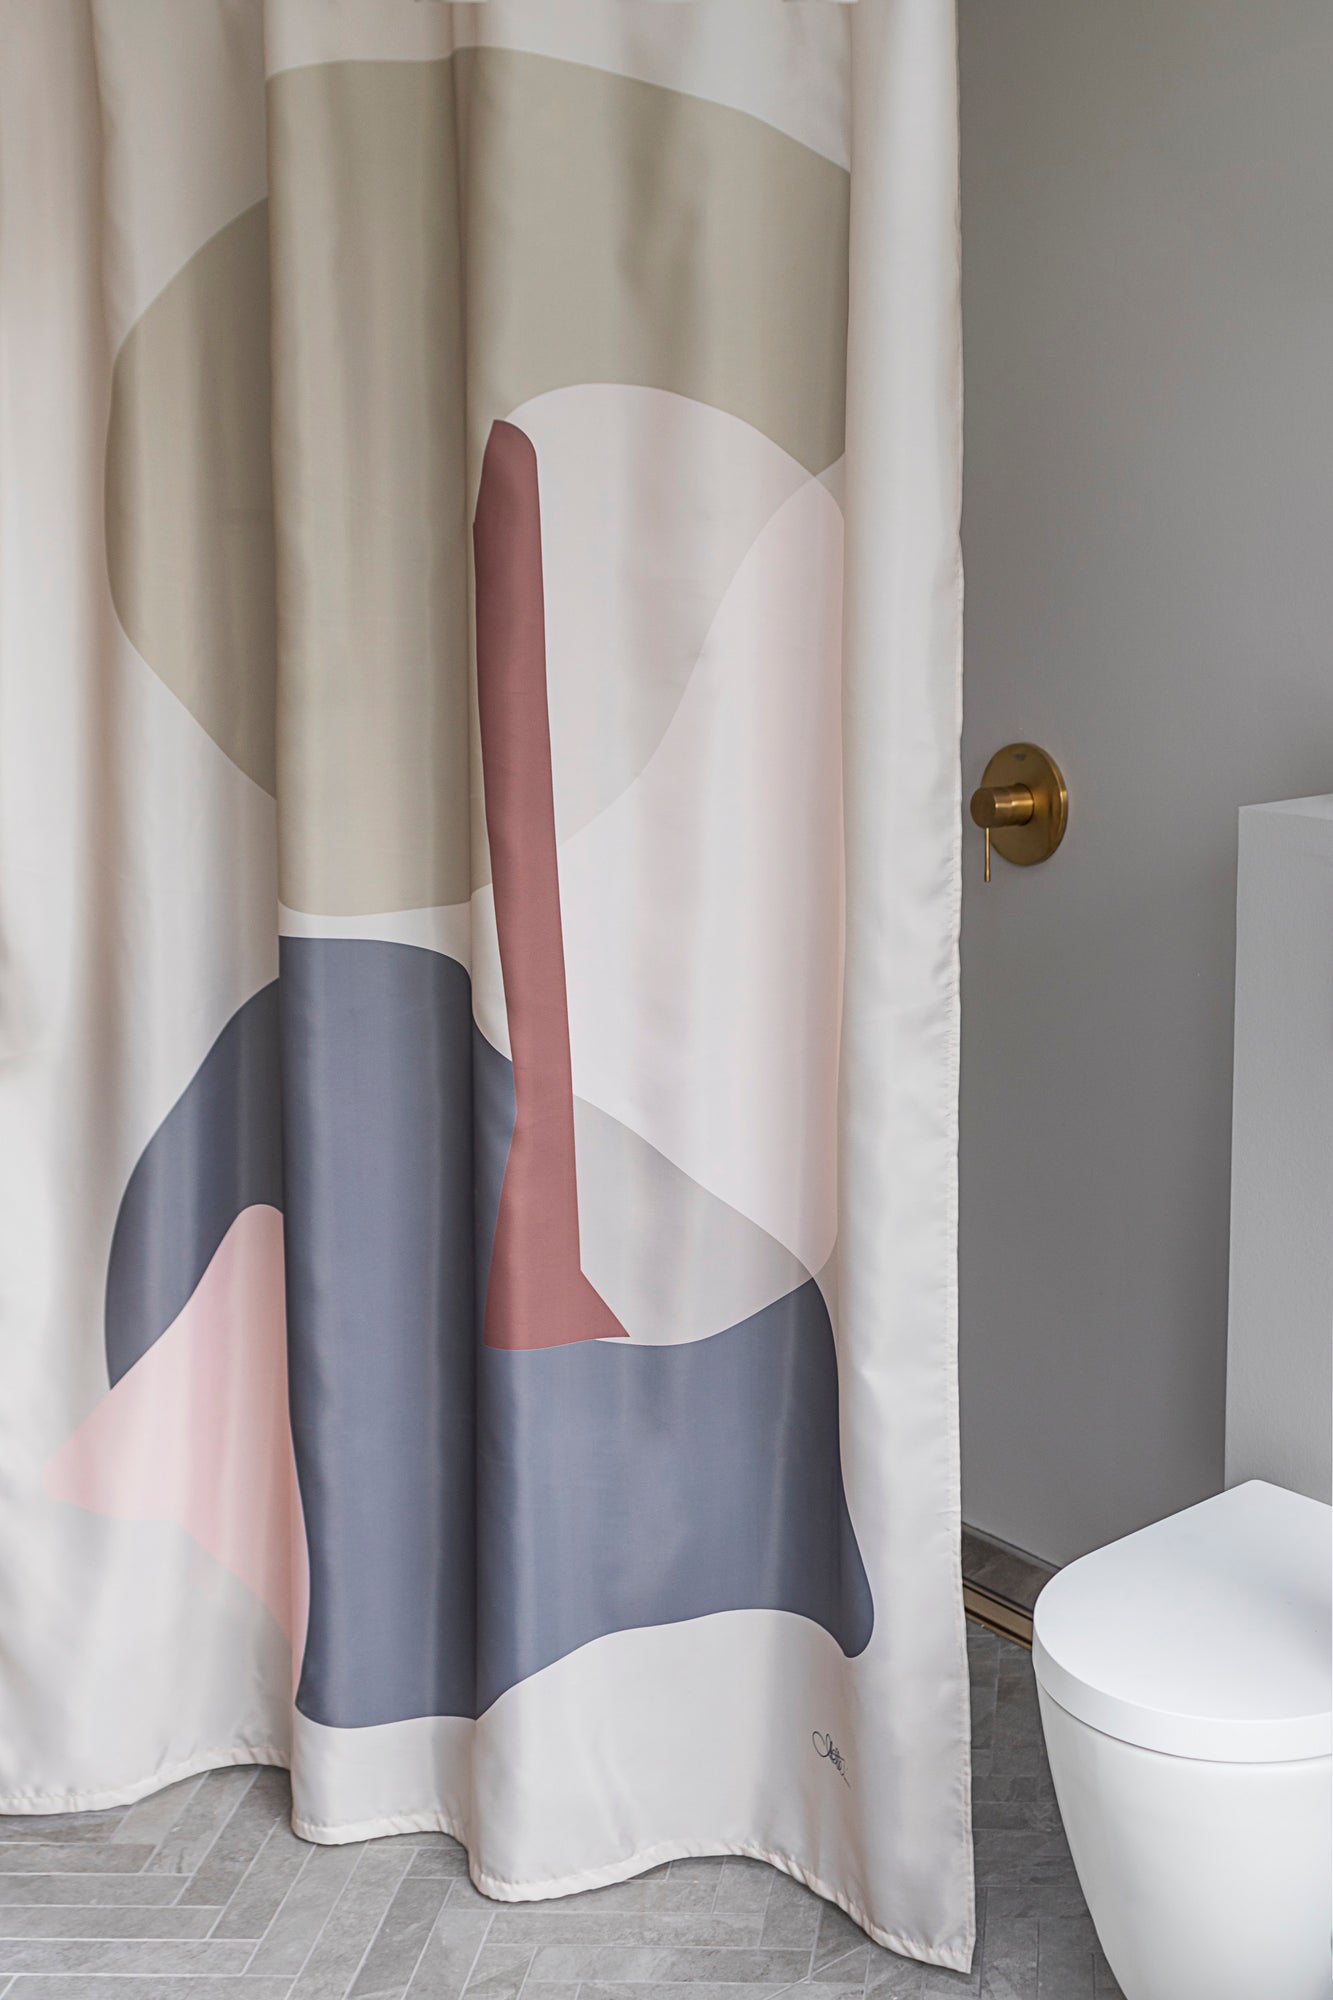 GALLERY Shower curtain by Mette Ditmer – Oliver Thom